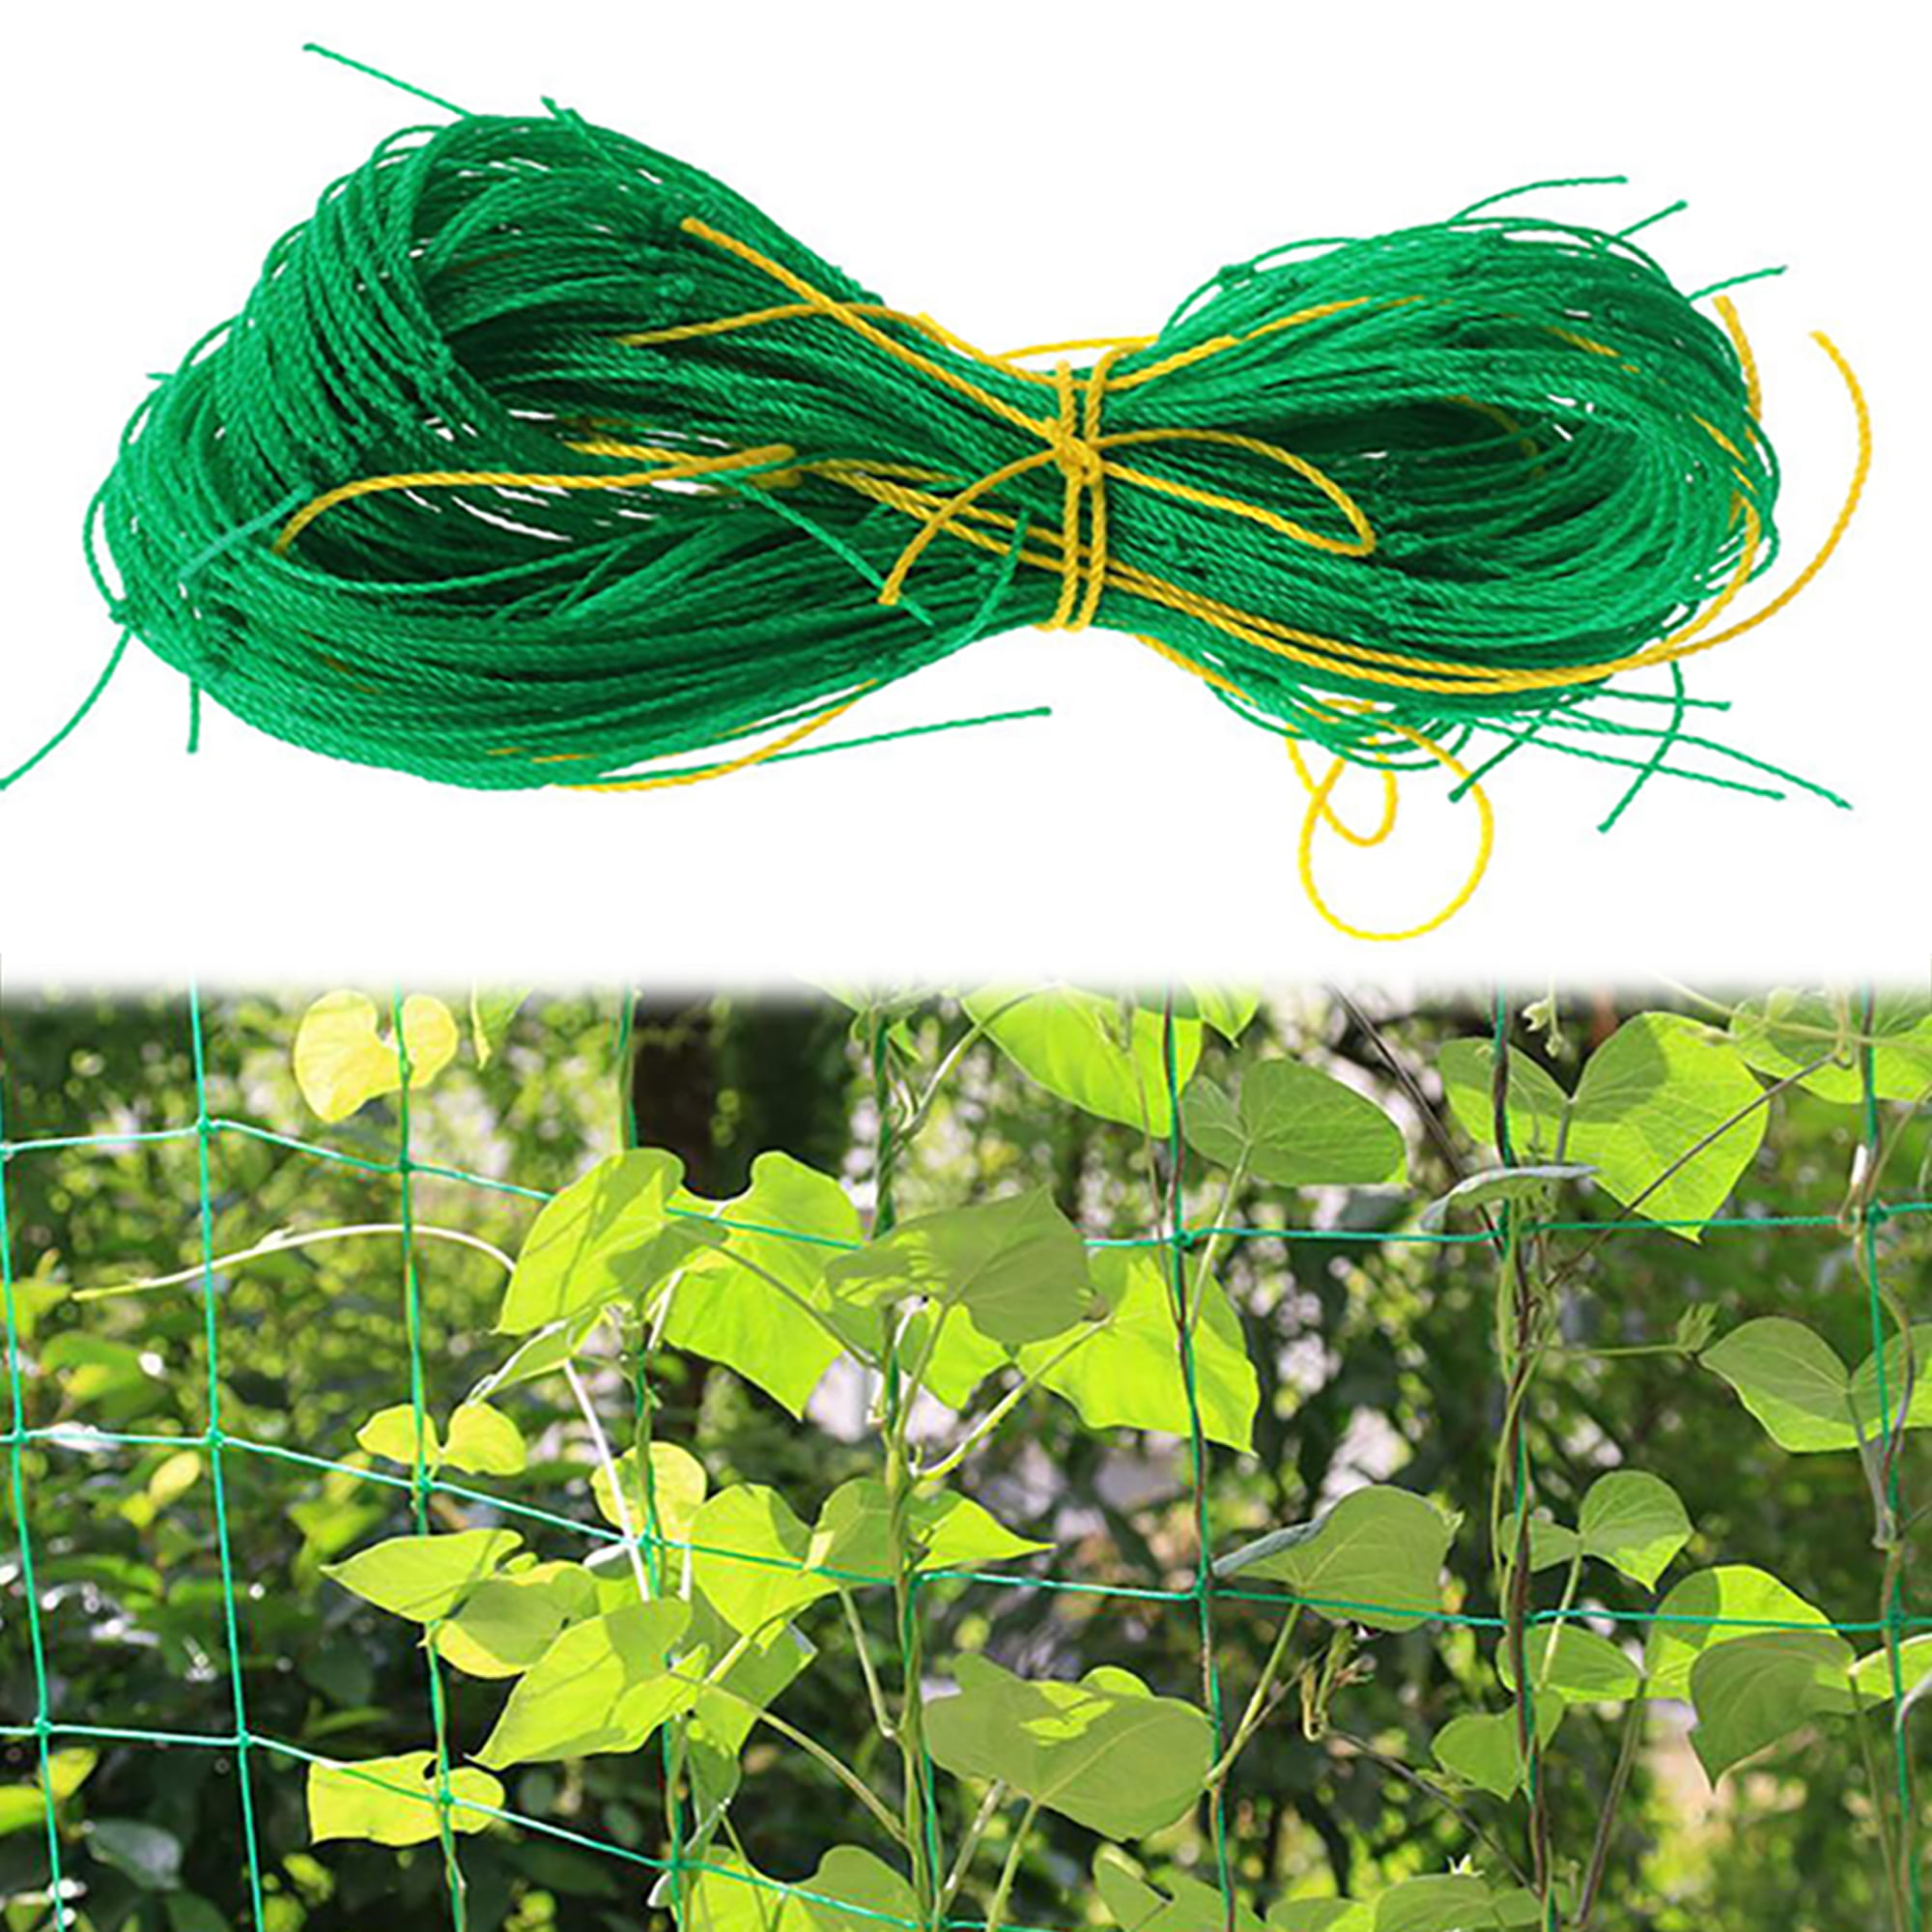 Flexible Polyester String Growing Net for for Climbing Plants White Vegetables 5 x 15 ft Tomato Cucumber Tangle Free Support Net Techson 2 Pack Plant Trellis Netting